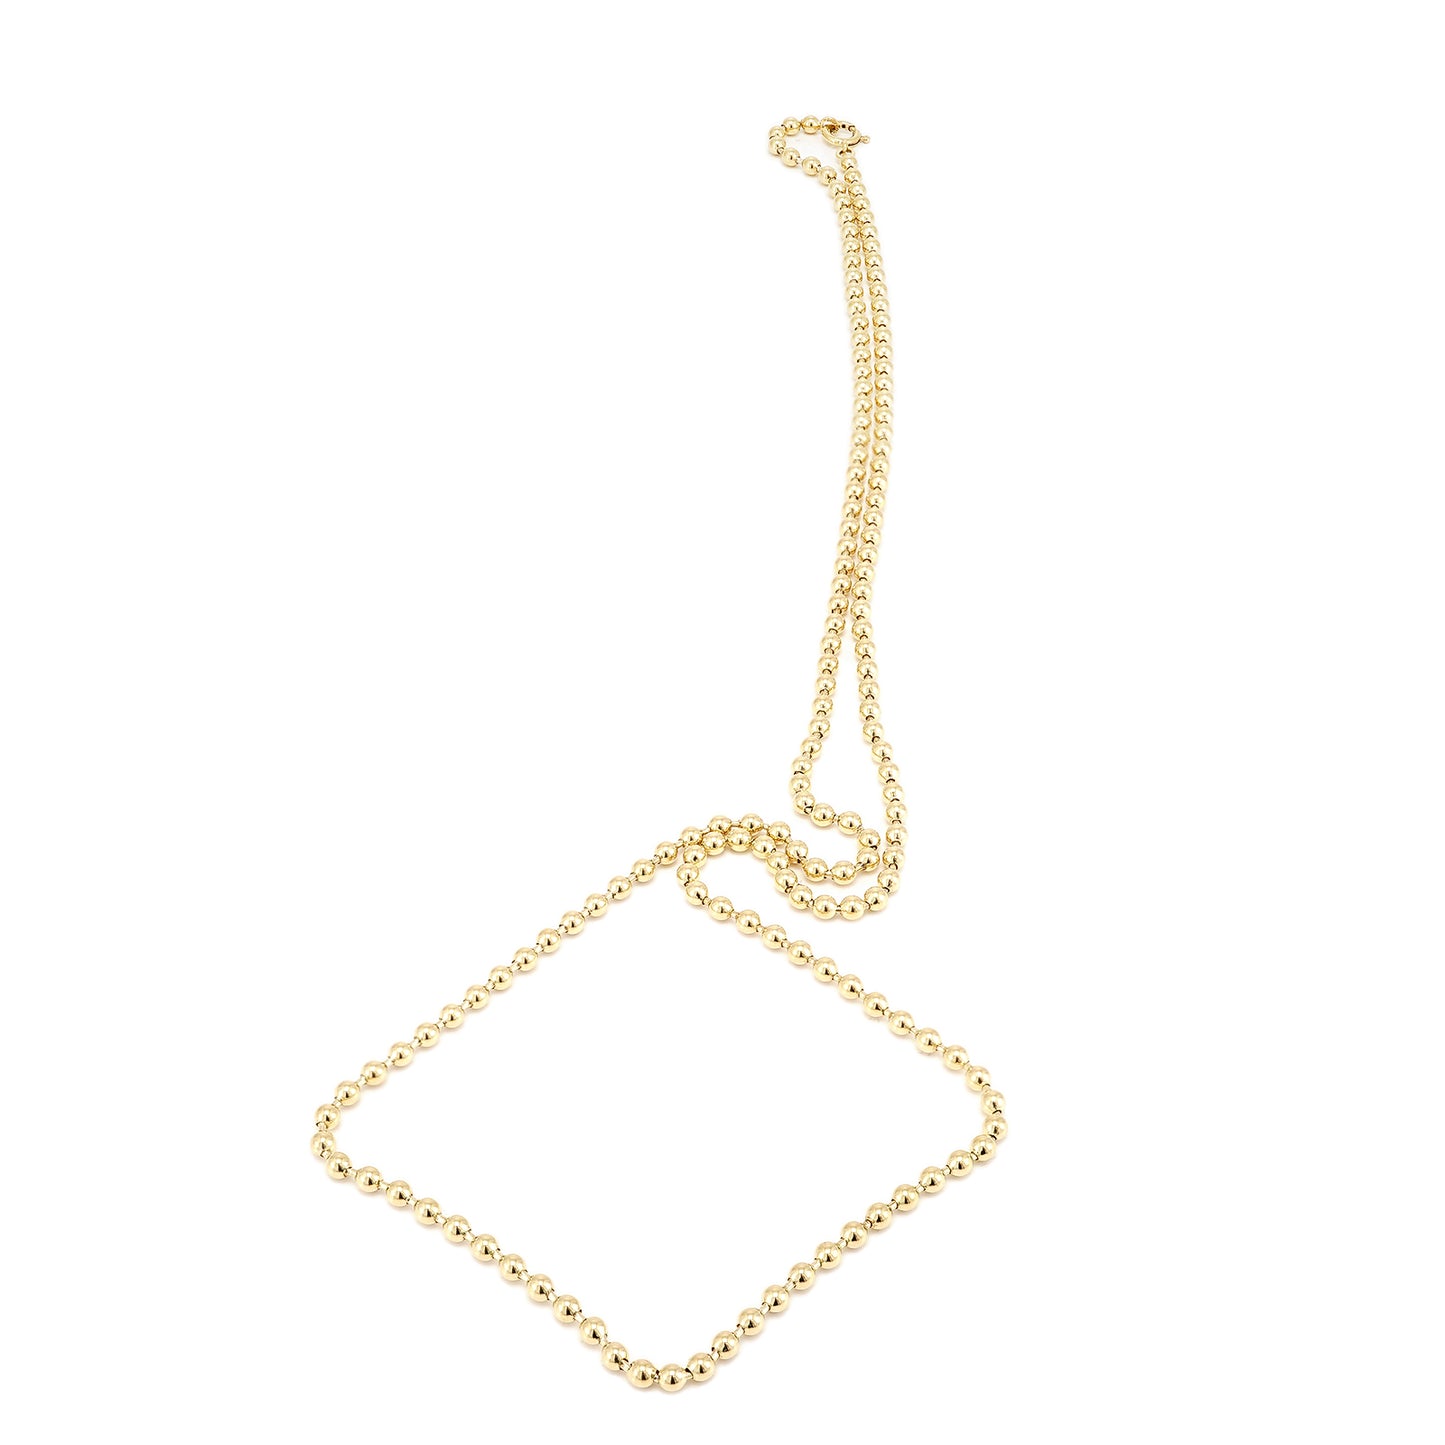 Ball chain yellow gold 585 14K 91cm extra long gold jewelry necklace ball necklace